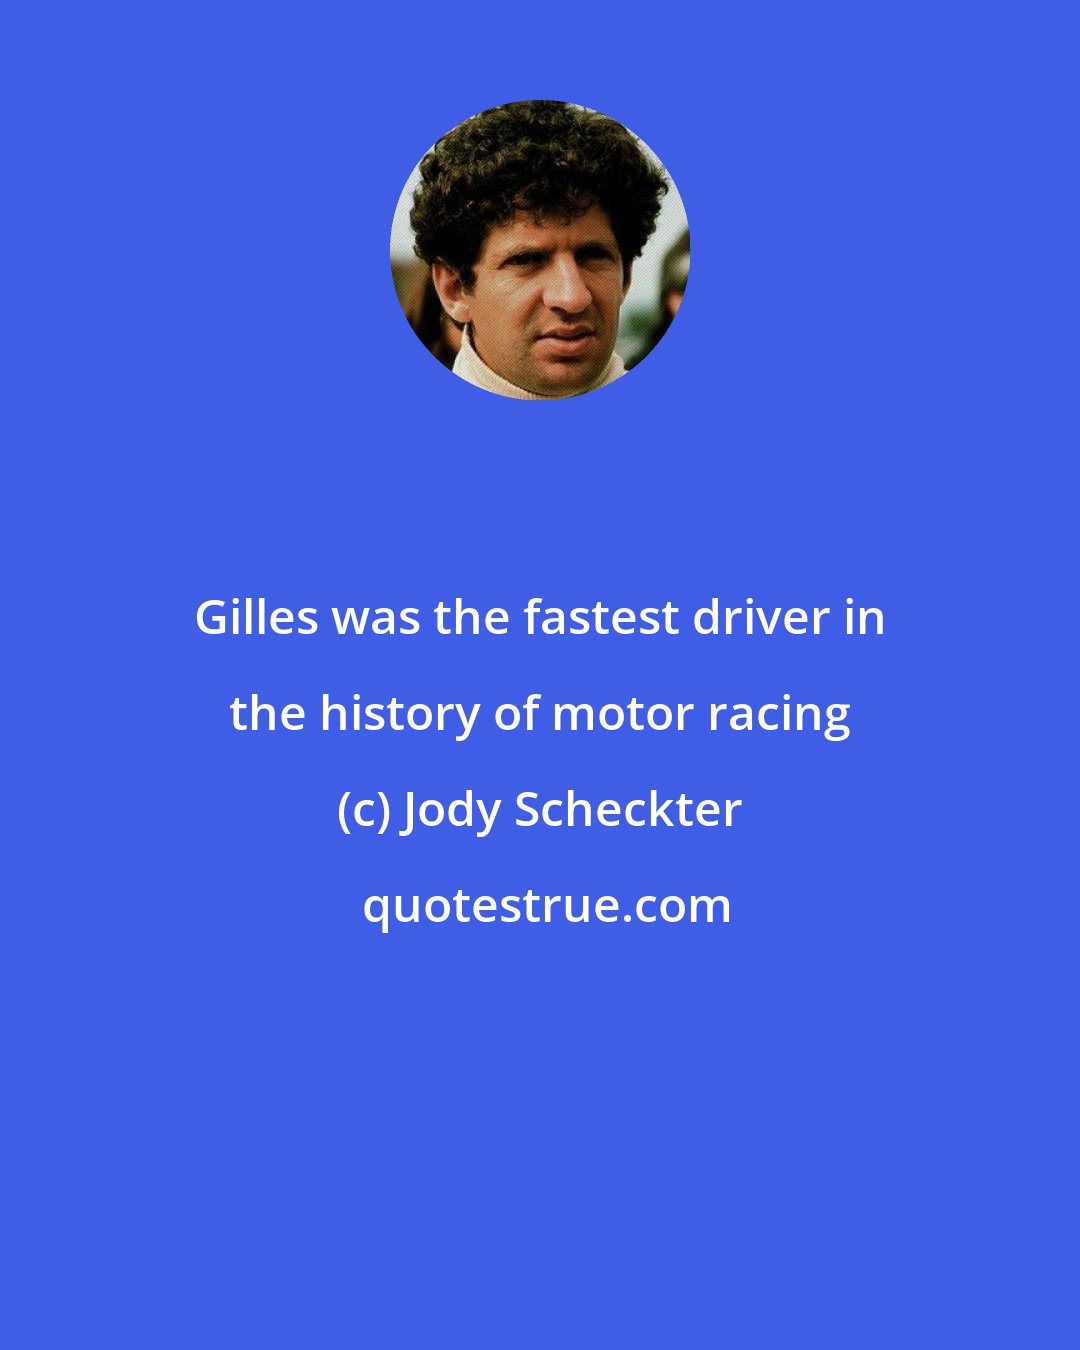 Jody Scheckter: Gilles was the fastest driver in the history of motor racing